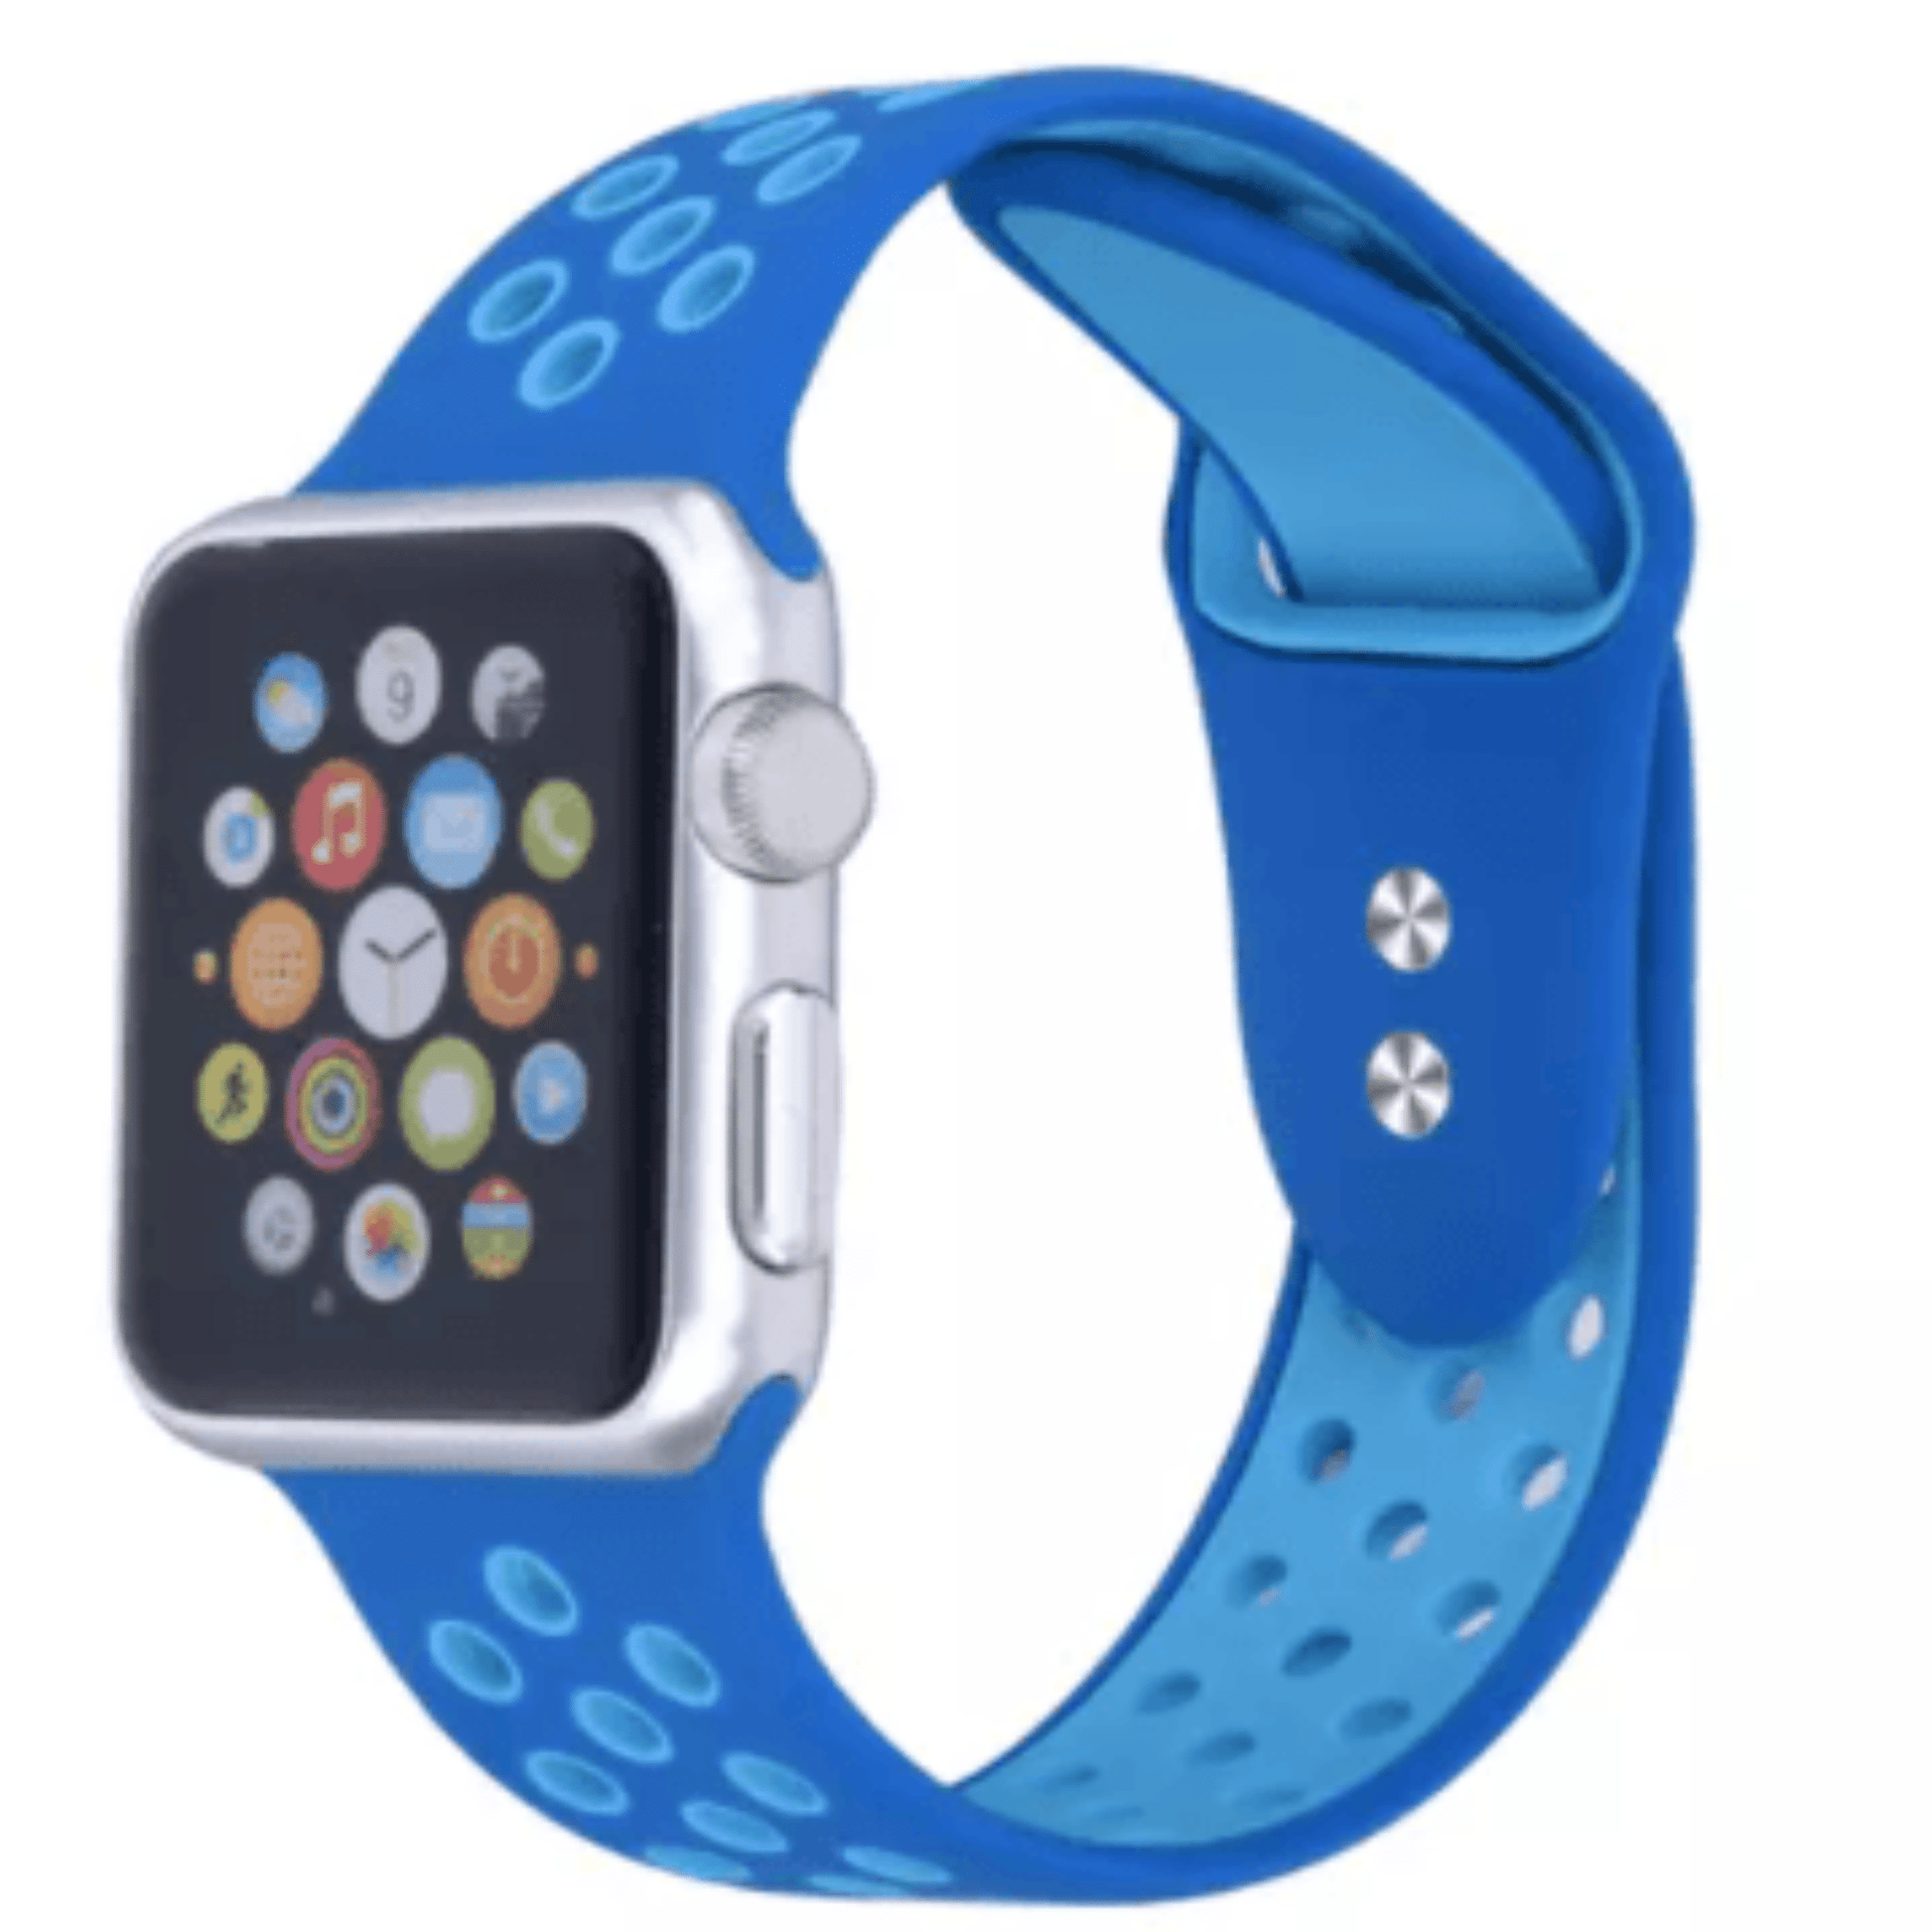 Breathable Silicone Sport Replacement Band for Apple Watch Blue Sky Apple Watch Band Elements Watches